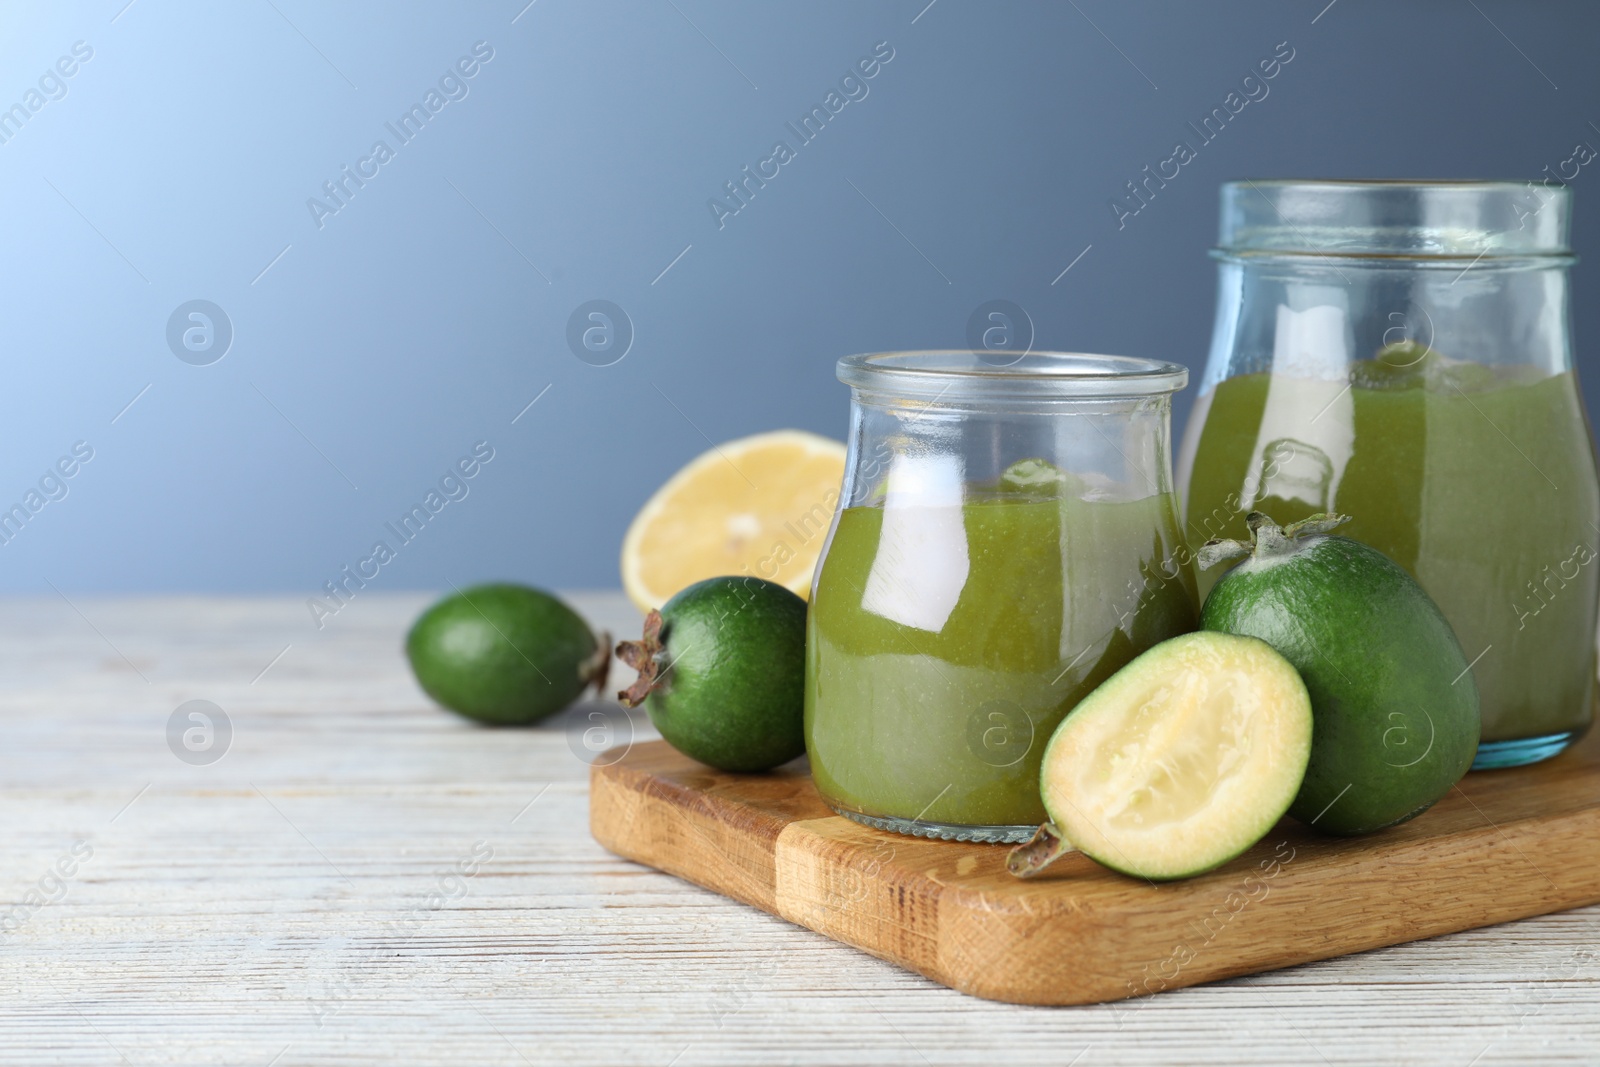 Photo of Feijoa jam and fresh fruits on white wooden table against light blue background. Space for text